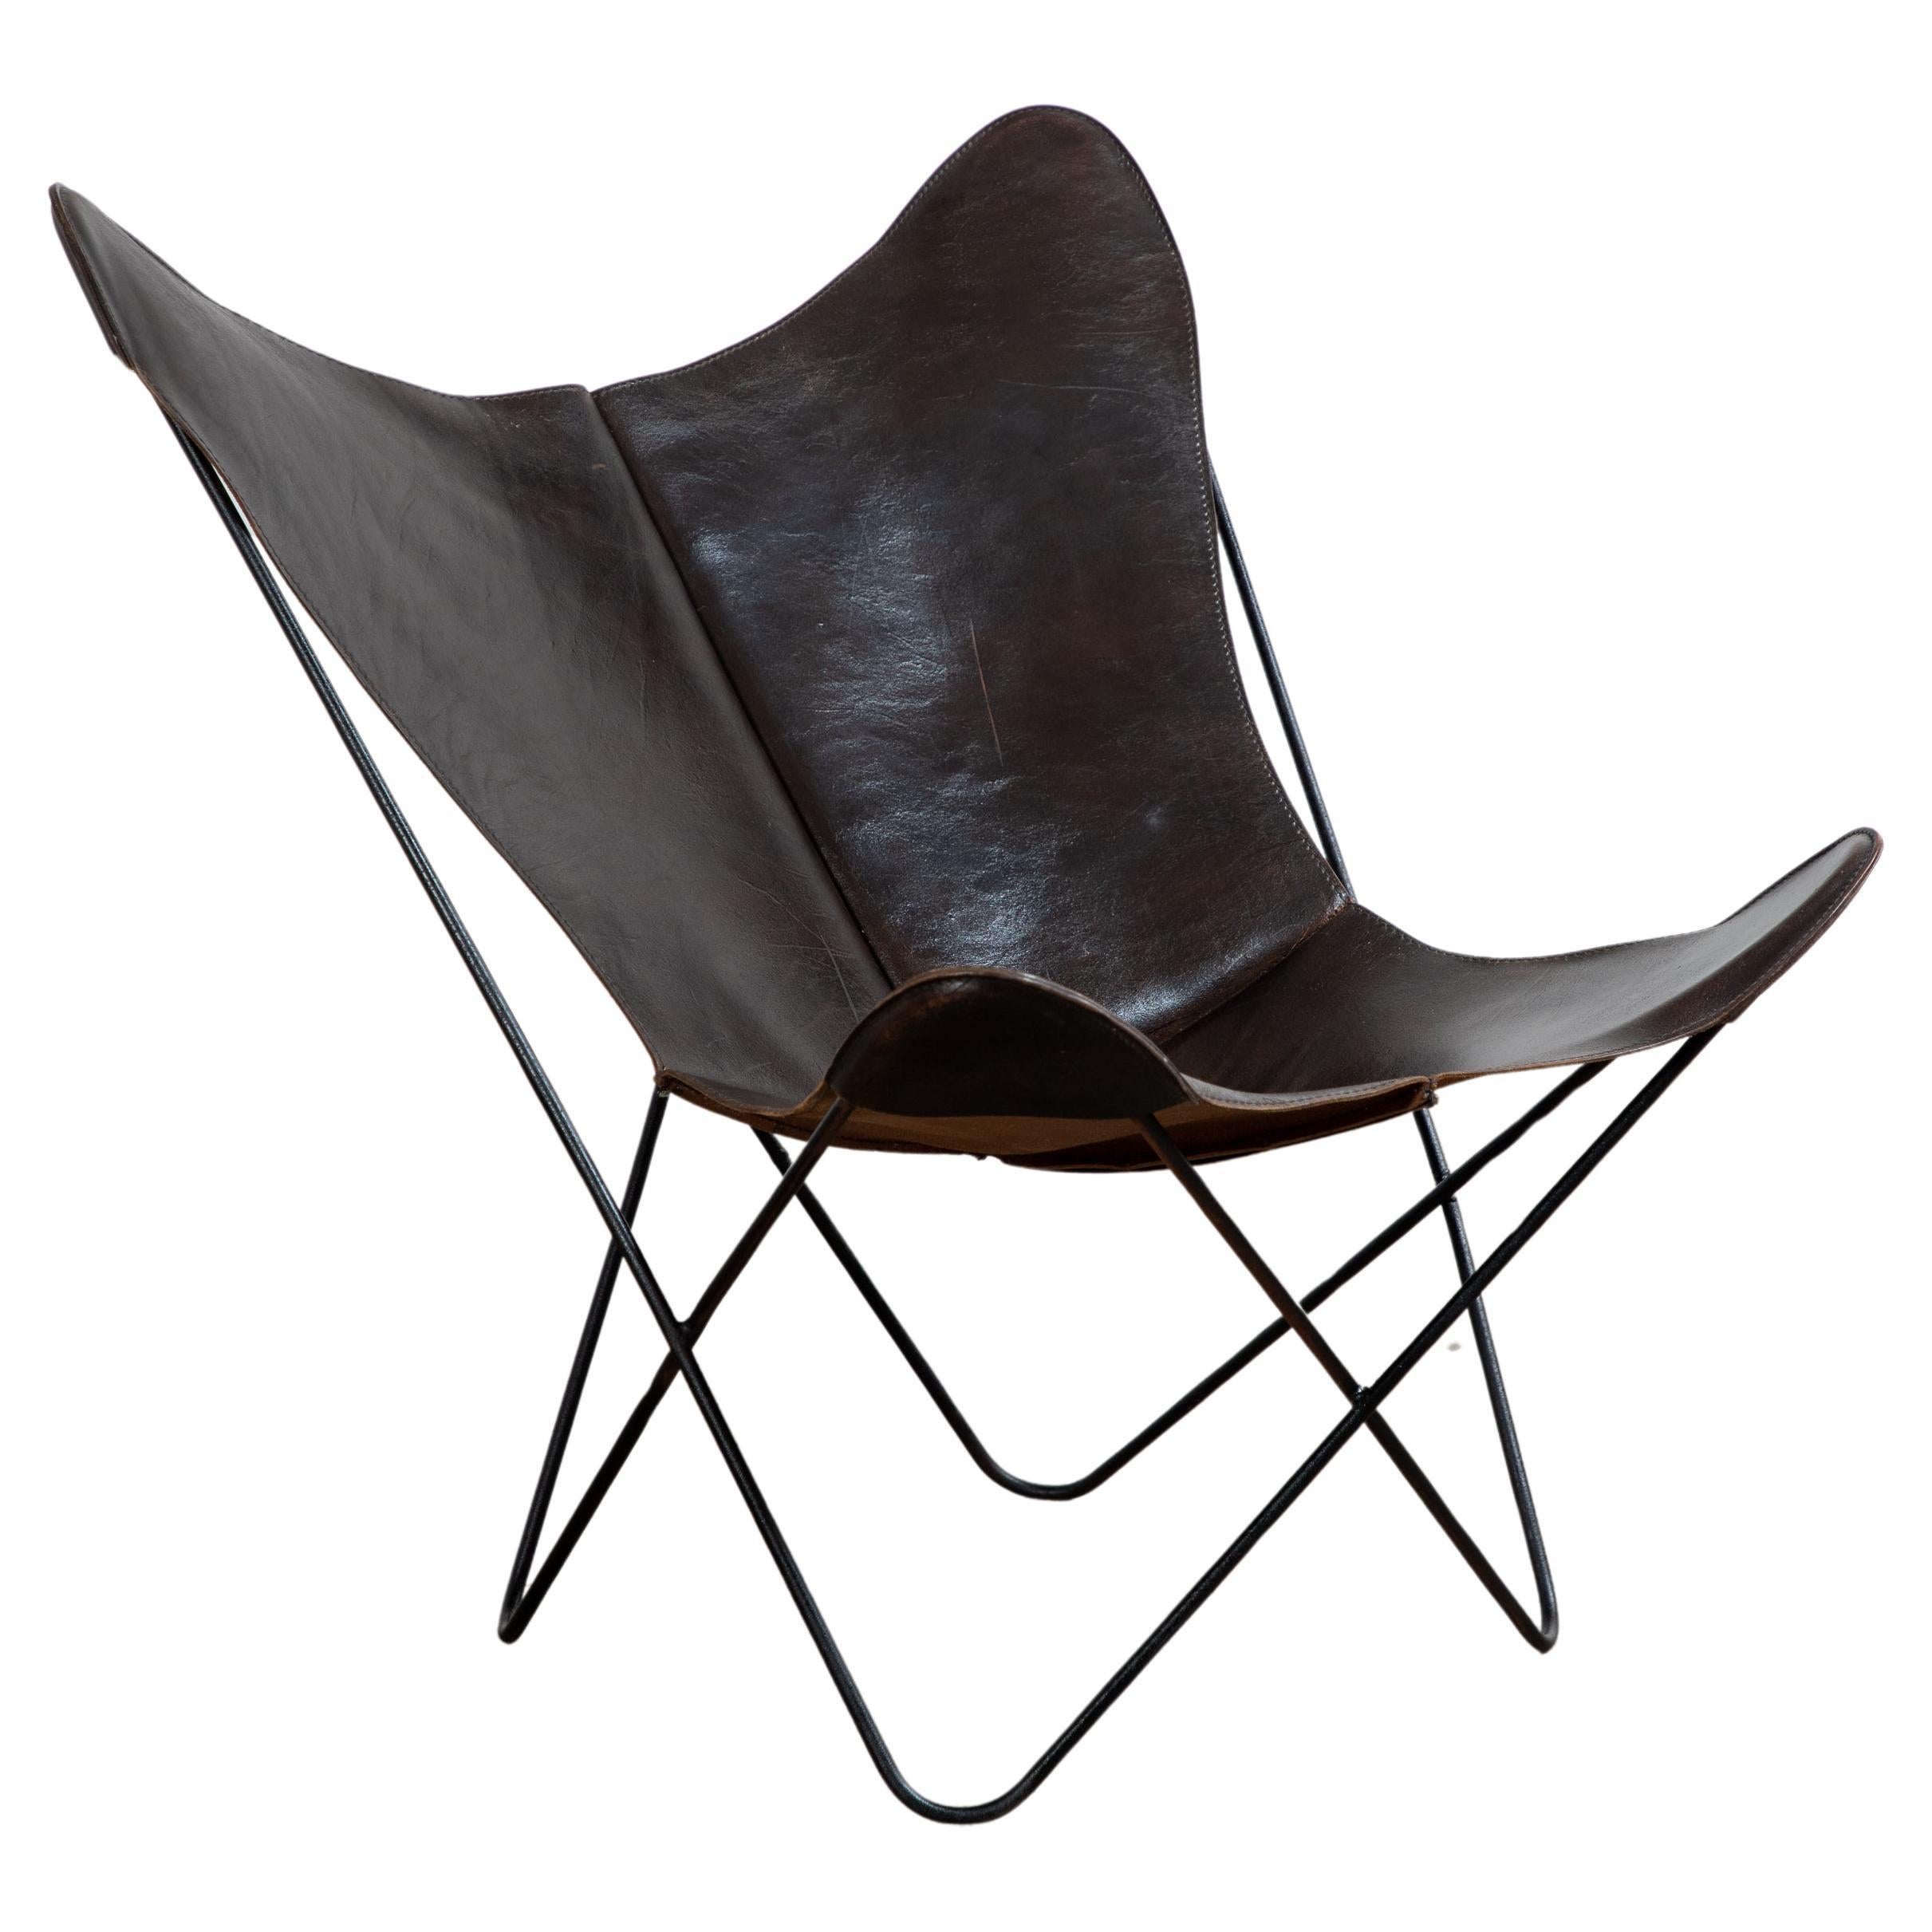 Original Deep Brown Leather Hardoy Butterfly Chair, Issued by Knoll, 1950s For Sale